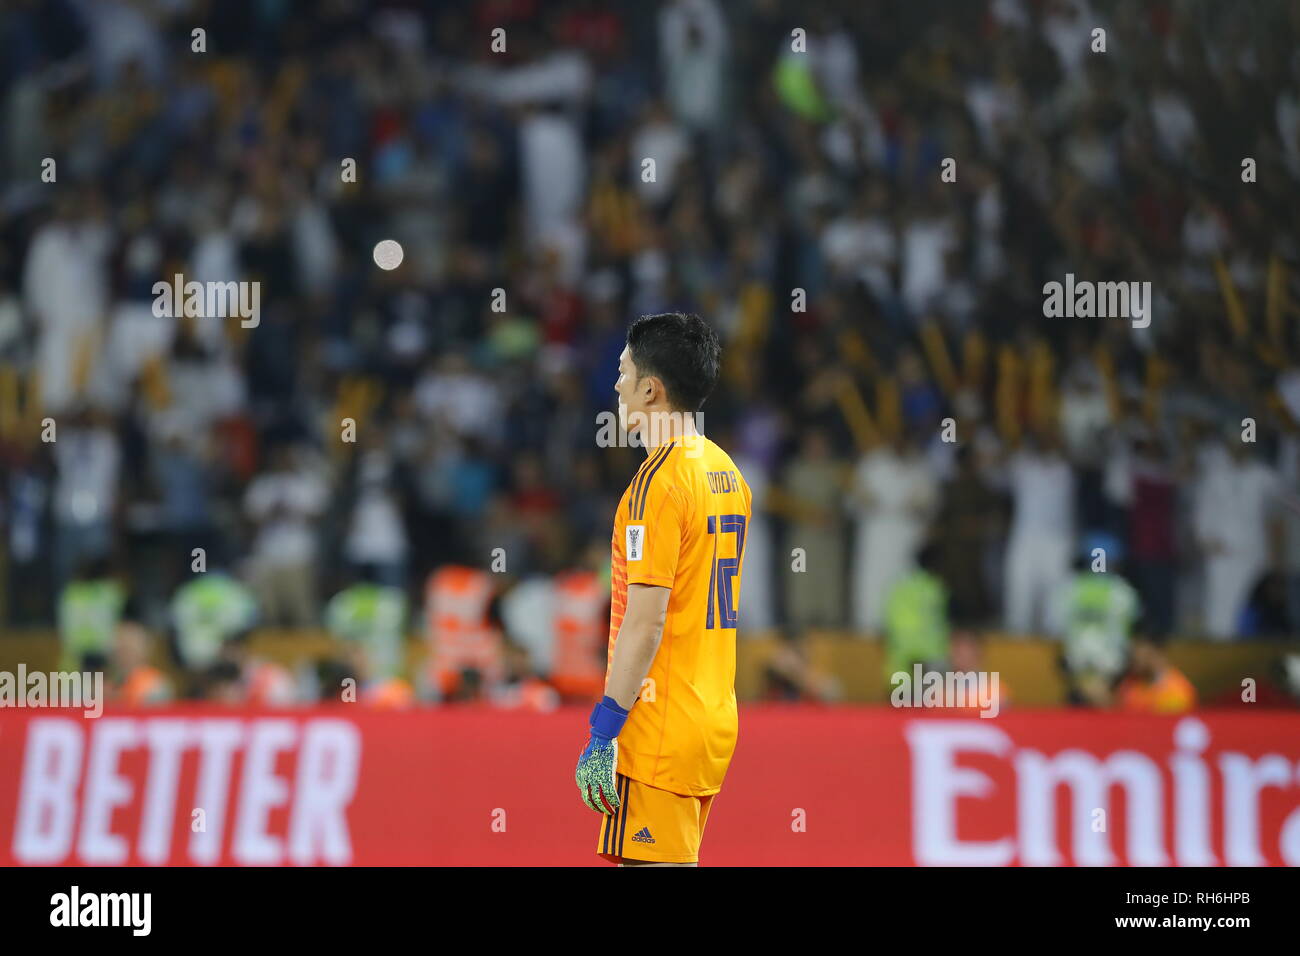 Abu Dhabi, United Arab Emirates (UAE). 1st Feb, 2019. Shuichi Gonda of Japan reacts during the final match between Japan and Qatar at the 2019 AFC Asian Cup in Abu Dhabi, the United Arab Emirates (UAE), Feb. 1, 2019. Credit: Ding Xu/Xinhua/Alamy Live News Stock Photo